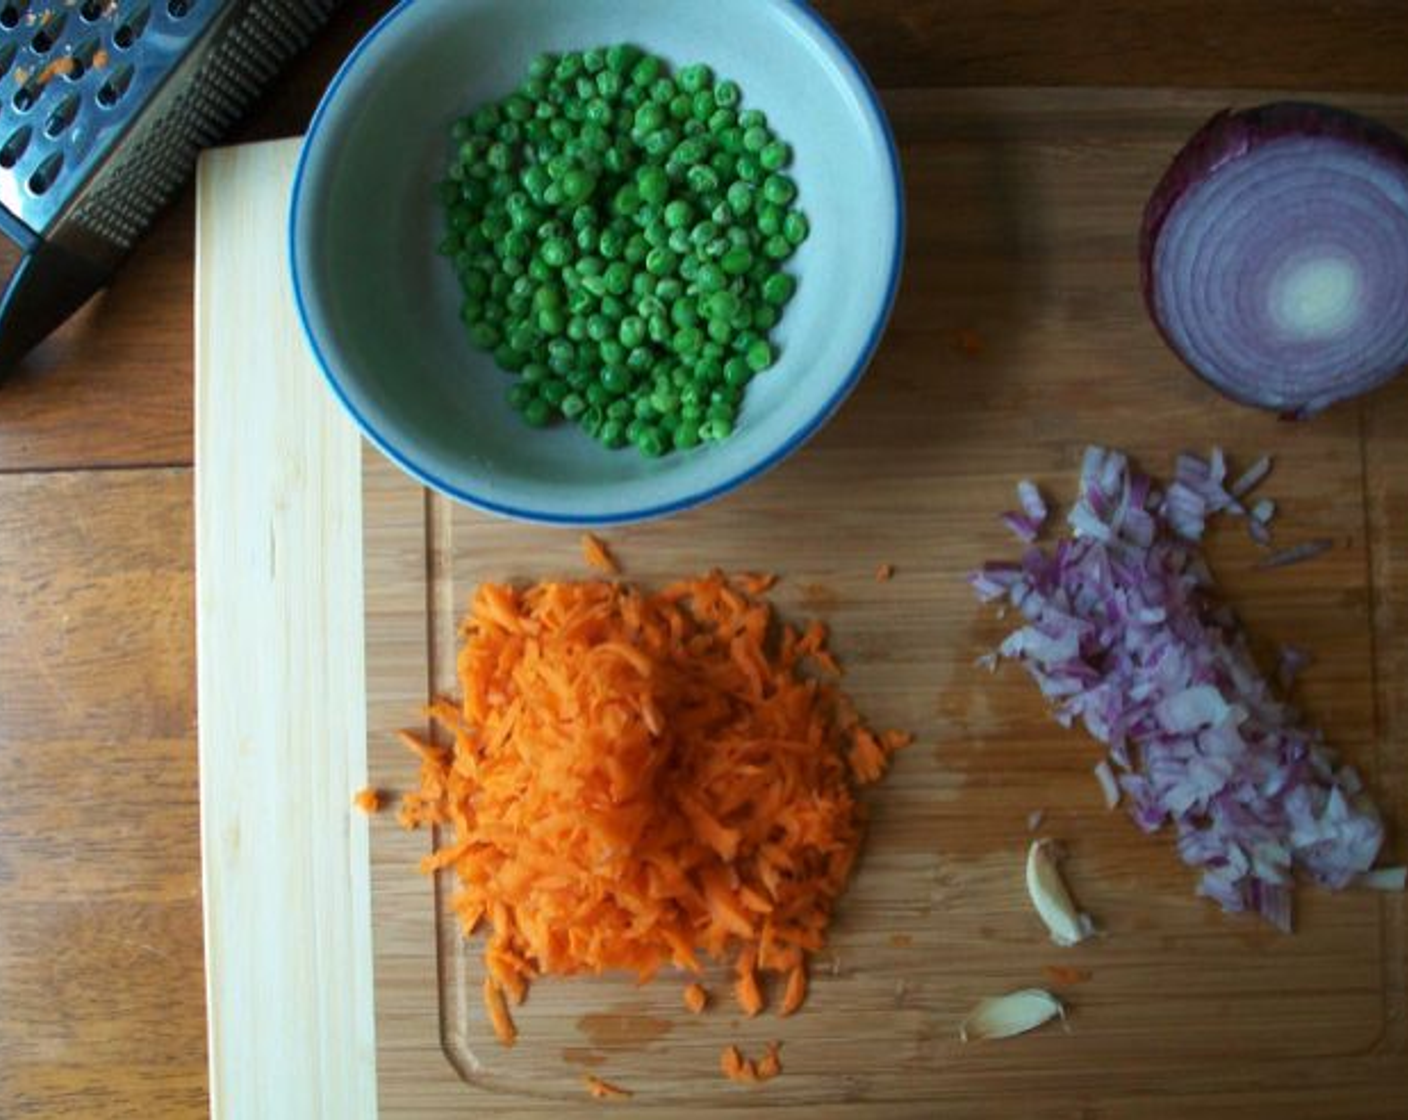 step 1 In a large pan or wok, saute Carrot (1), Onion (1/4), and Green Peas (1/4 cup) in a teaspoon of oil for two minutes.